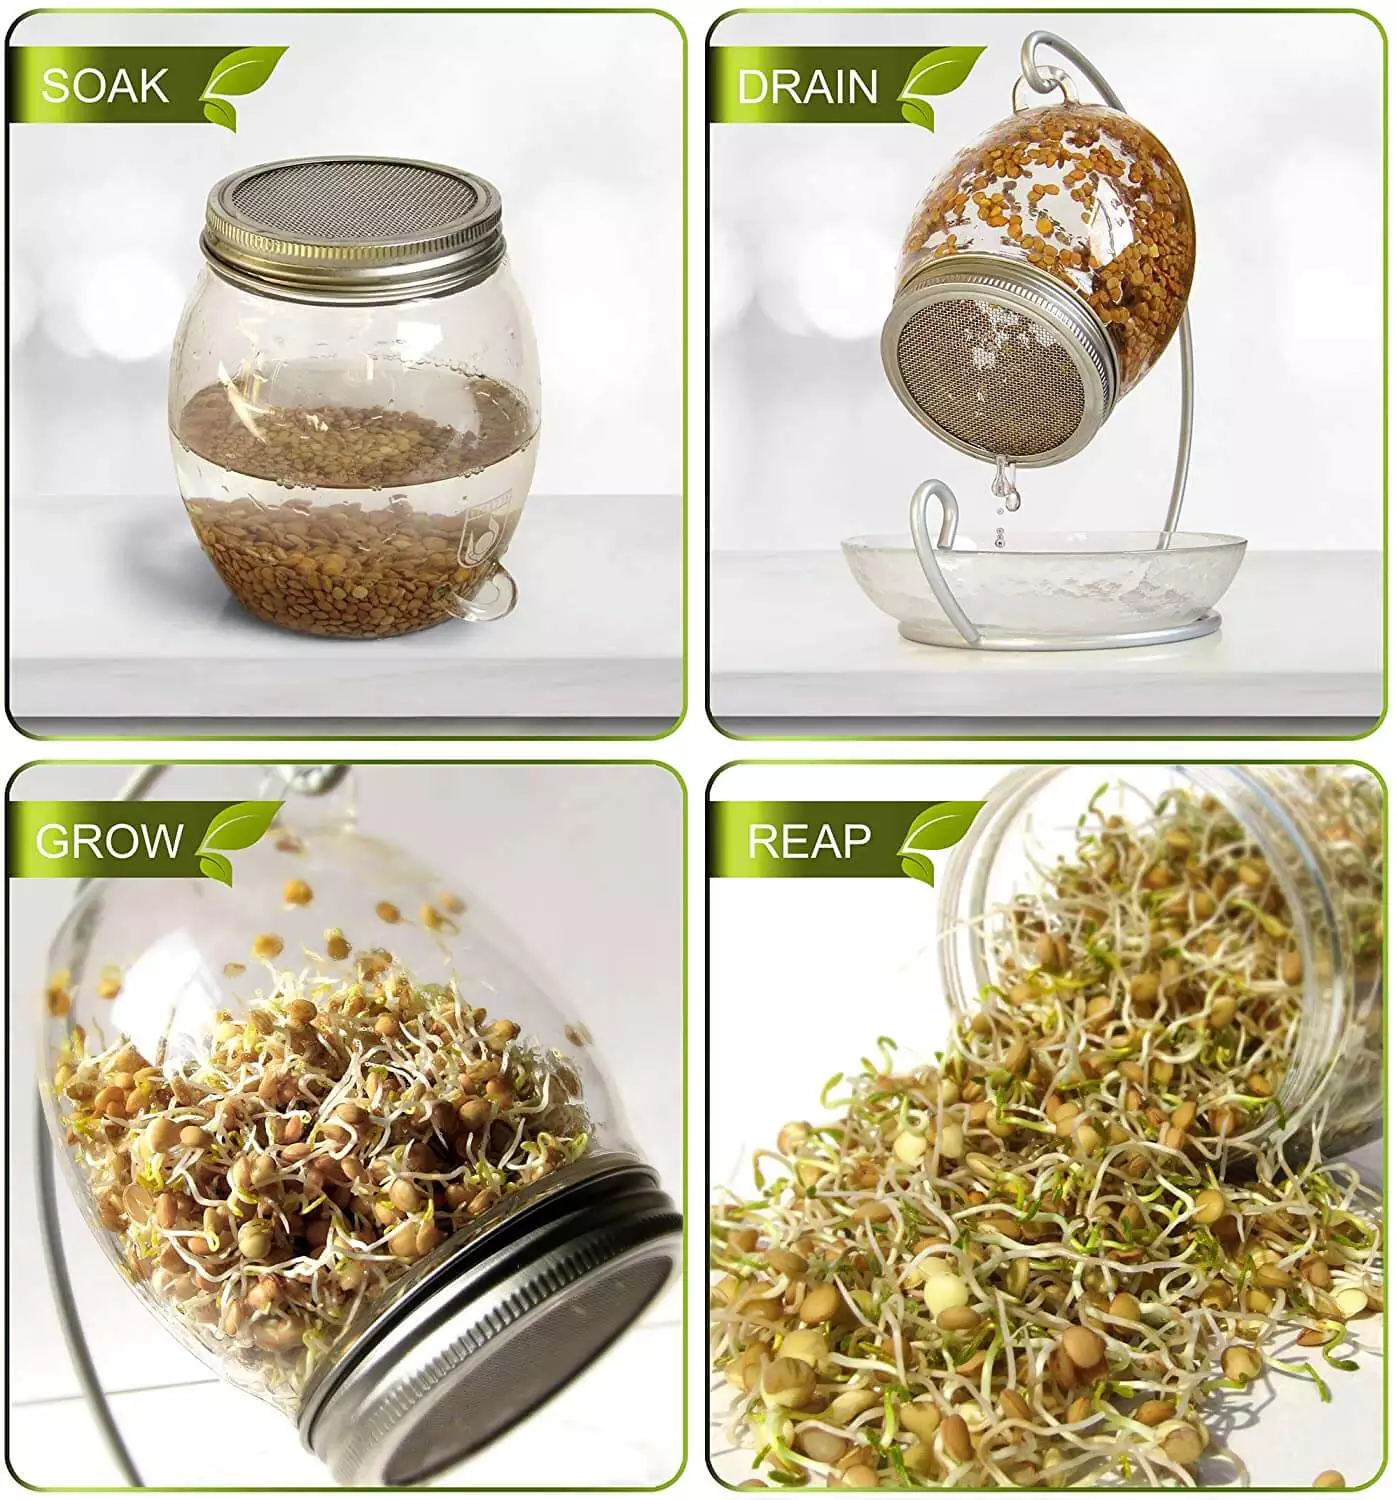 The complete process of growing sprouts in a glass sprout jar at home